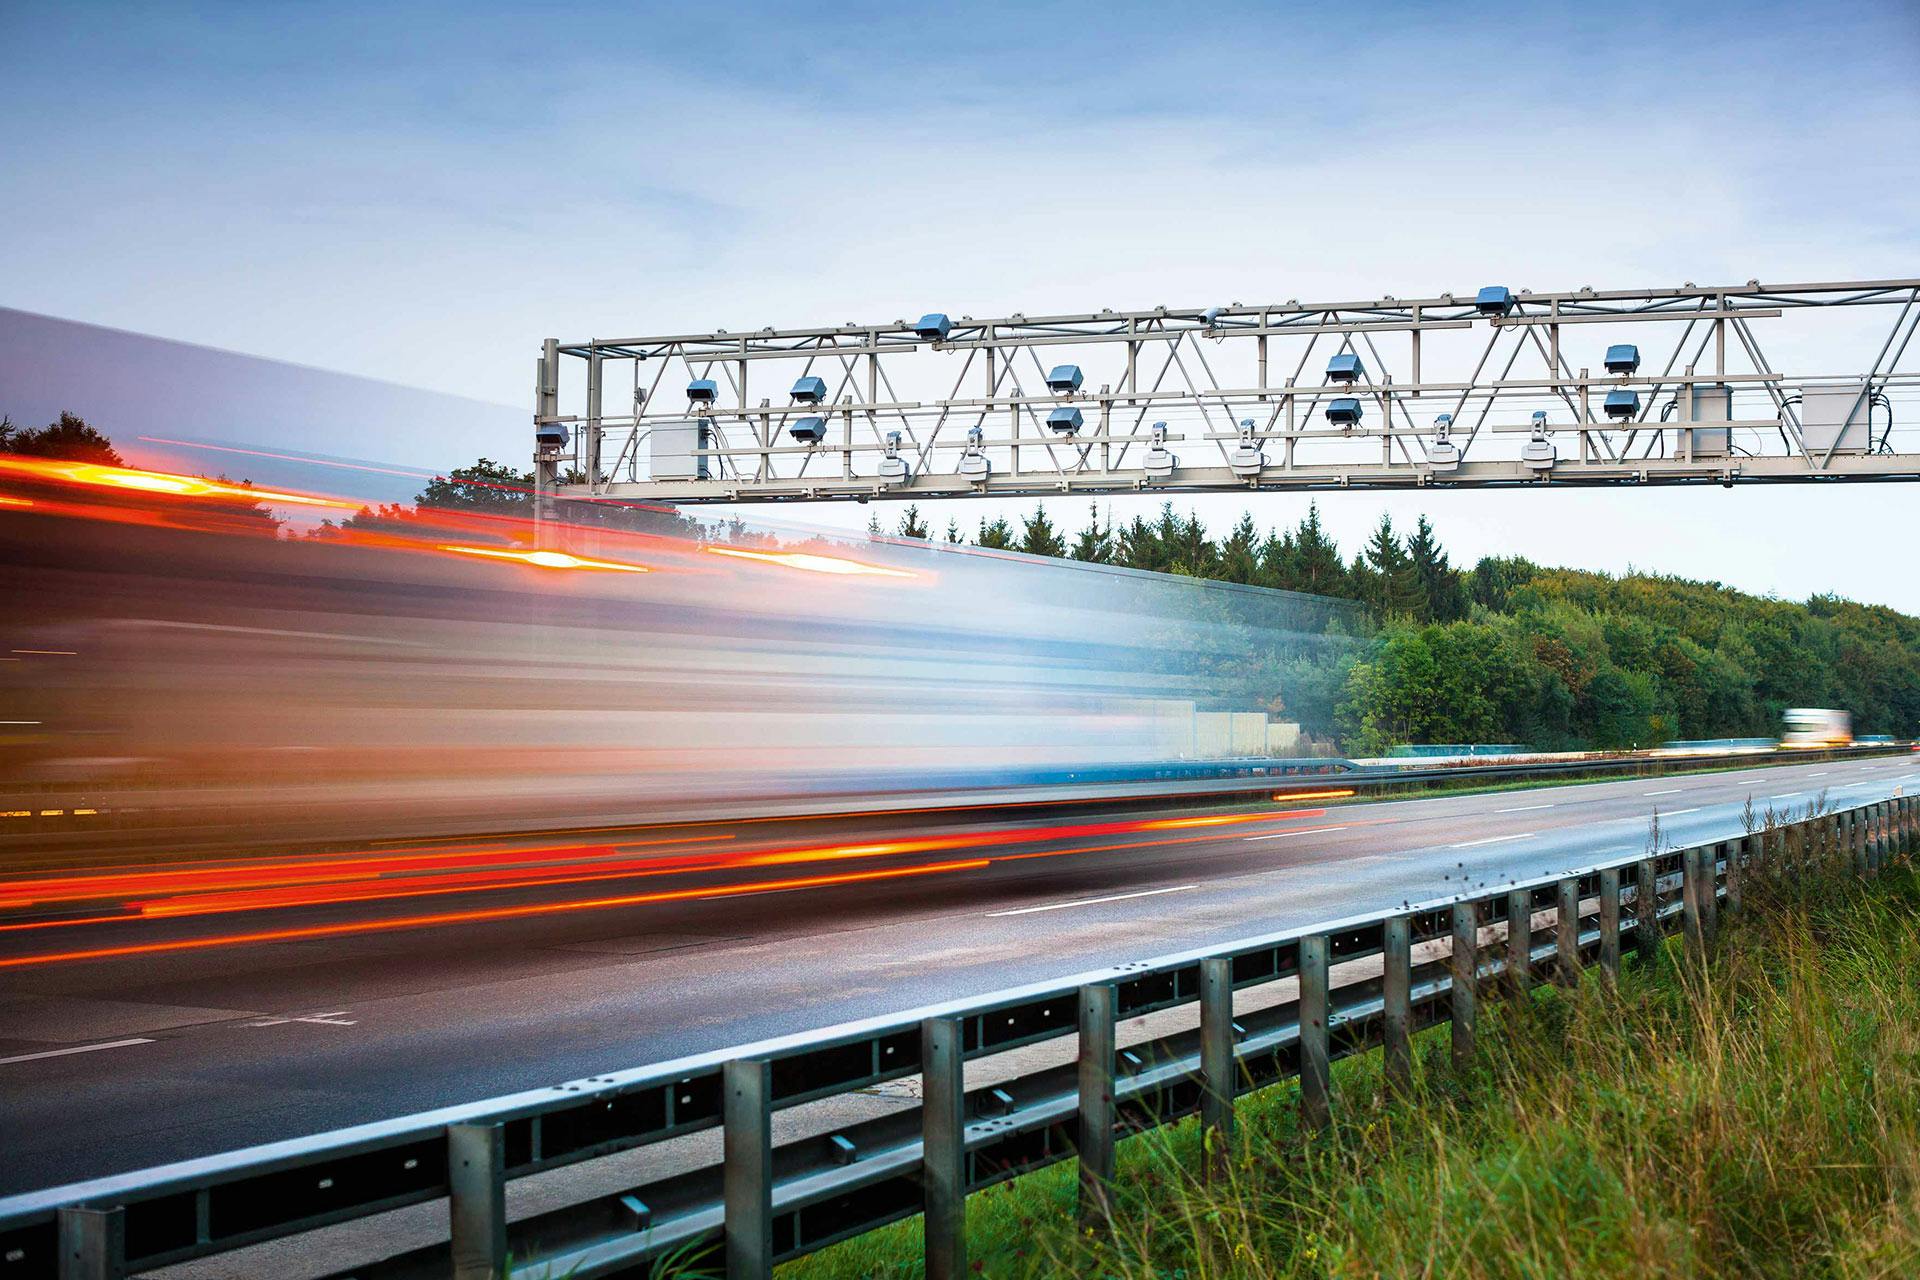 Toll gantry for distance-based road charging and enforcement												